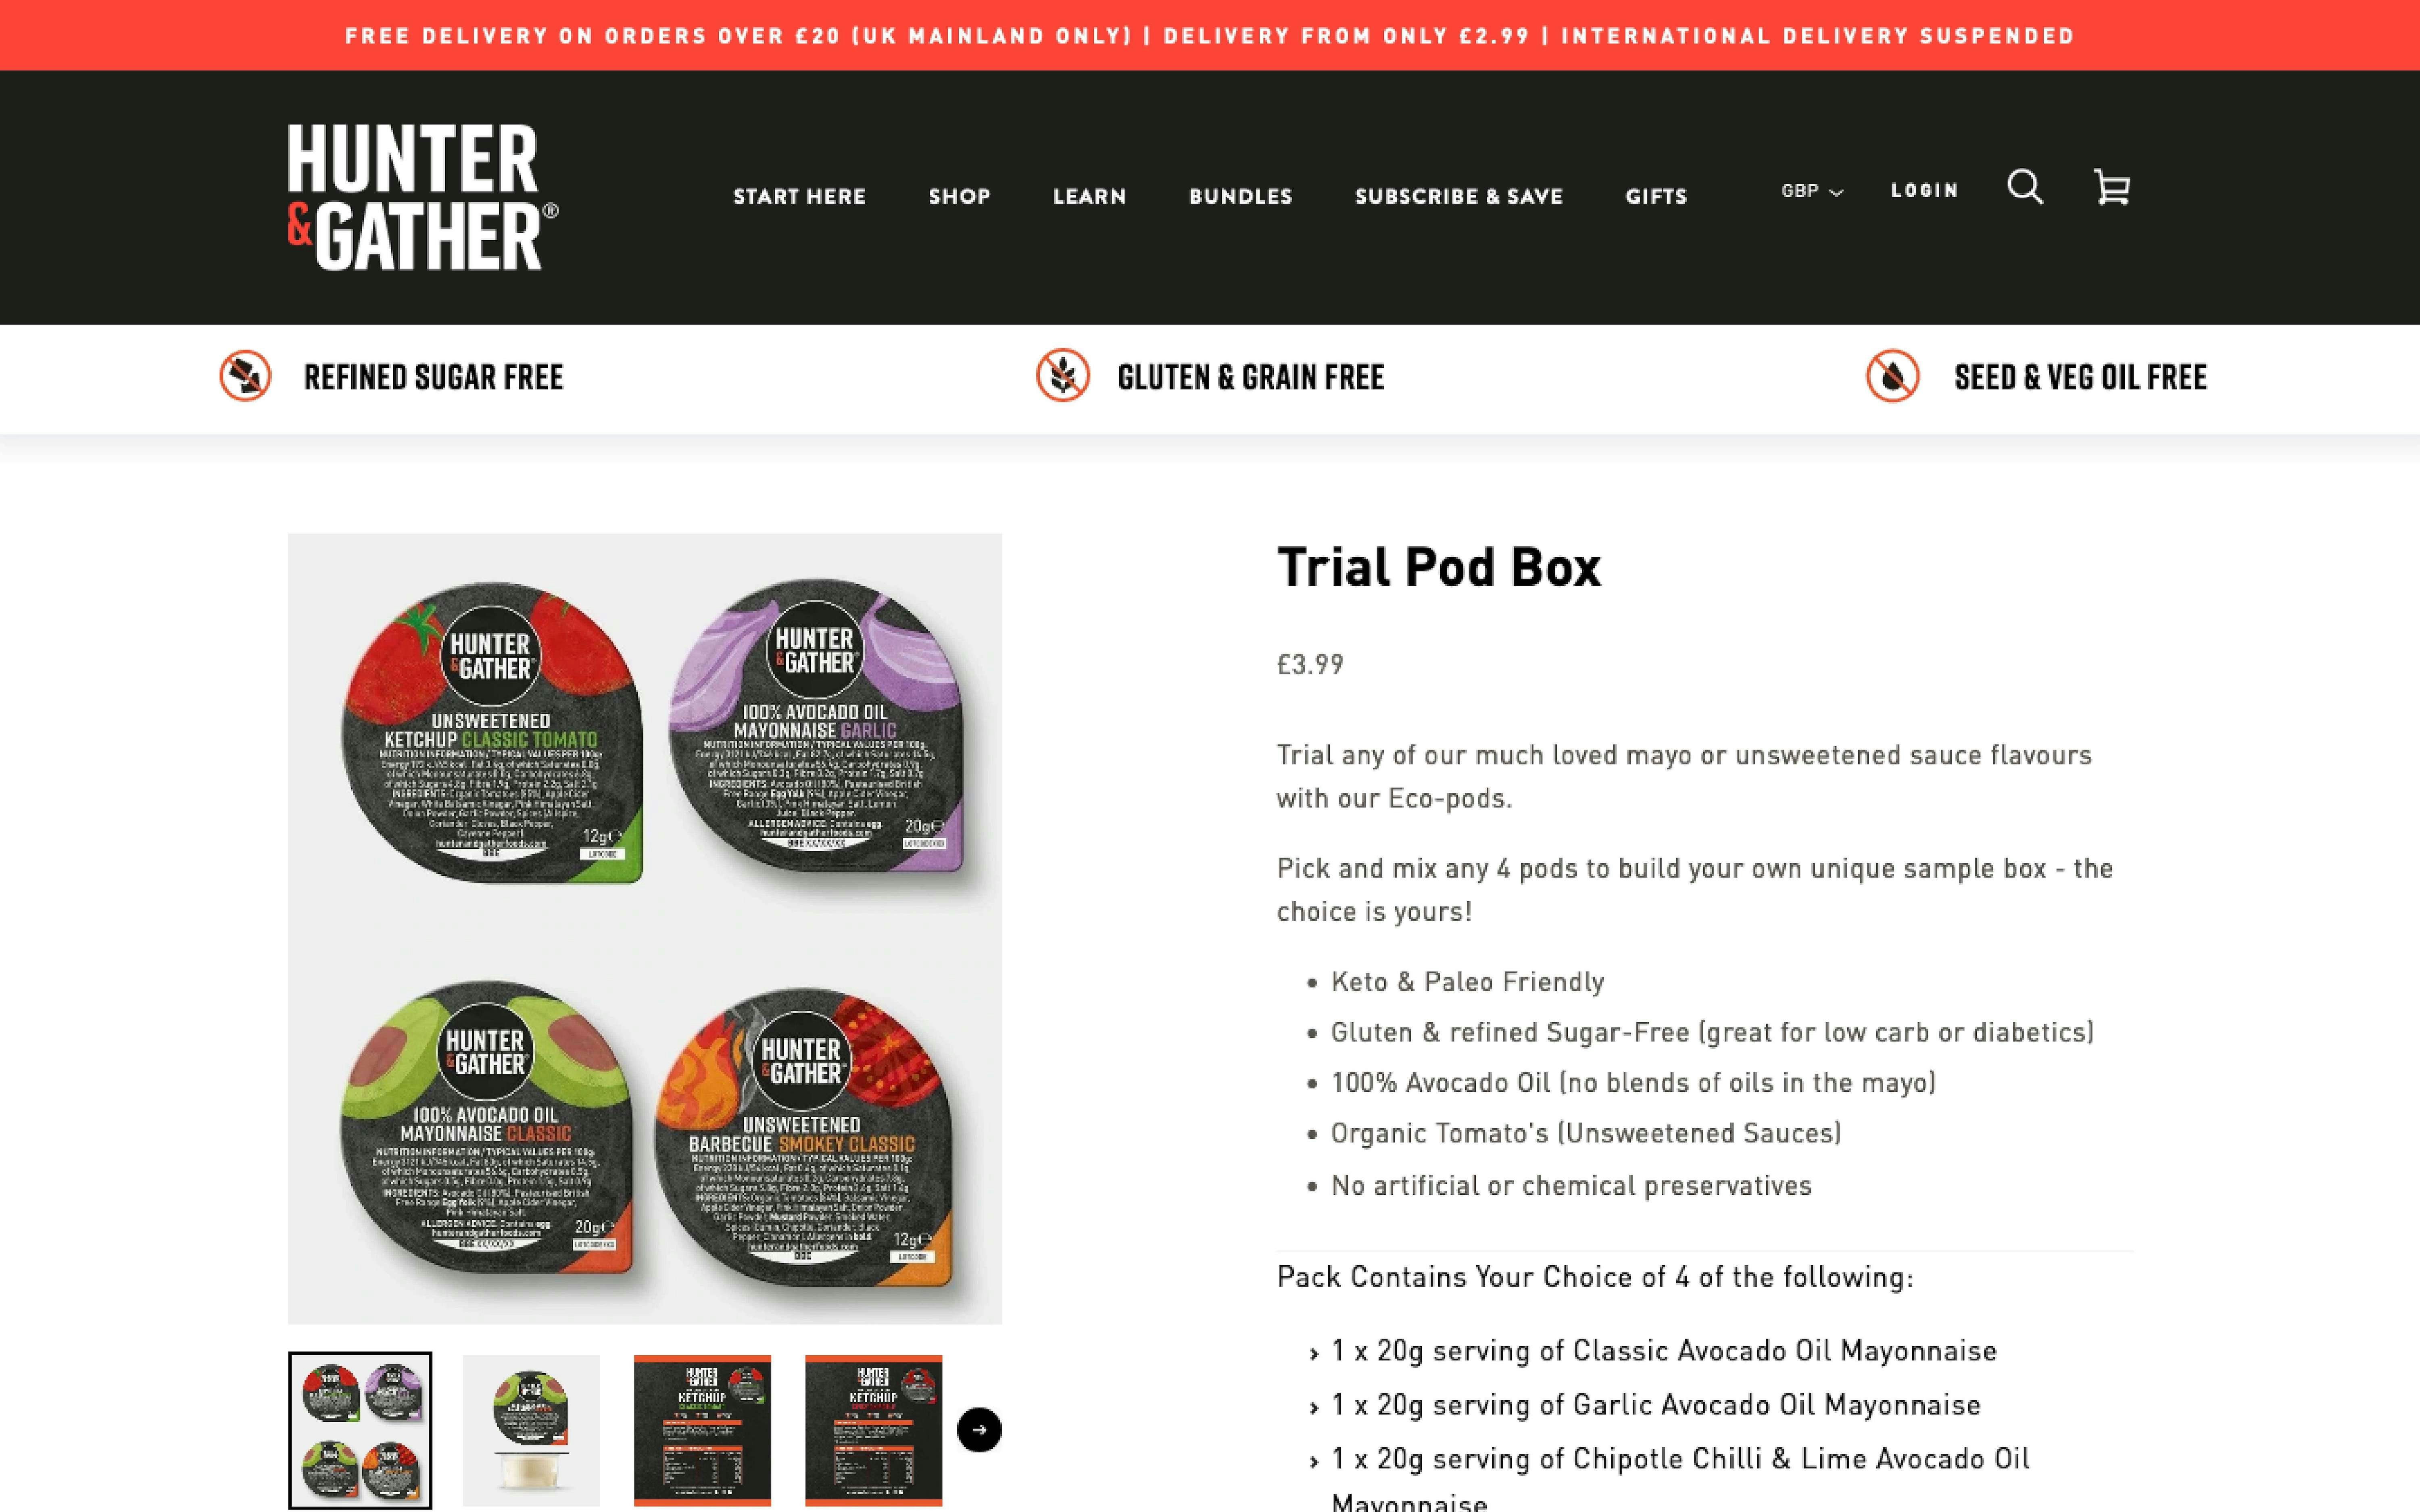 Screenshot showing a web page for Hunter & Gather, designed by Noughts & Ones 